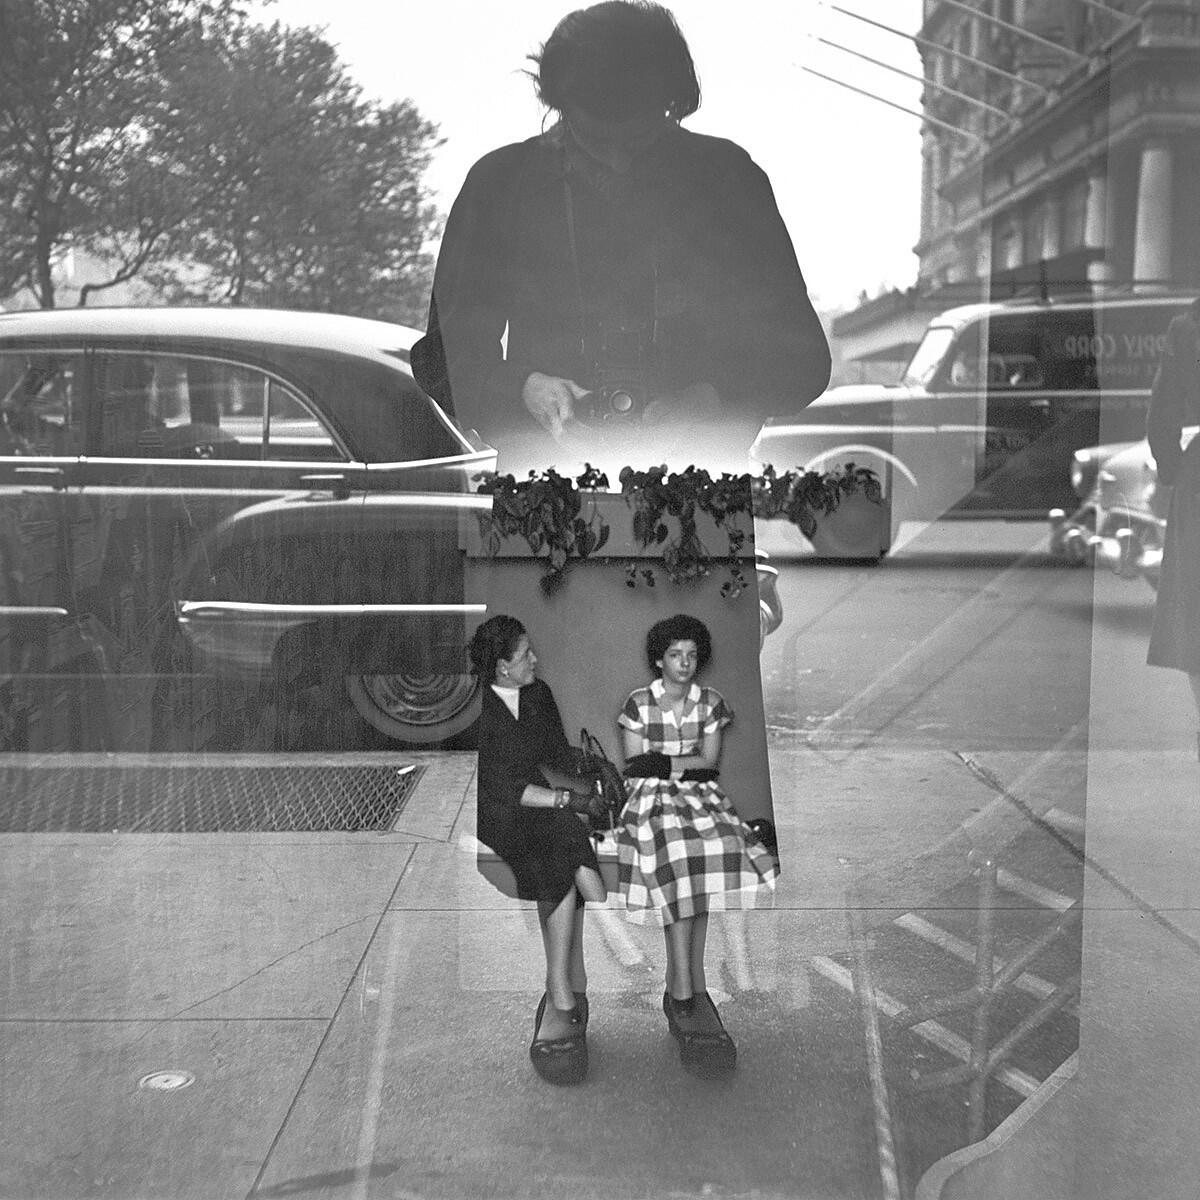 Vivian Maier is shown in silhouette whle photographing two seated women.